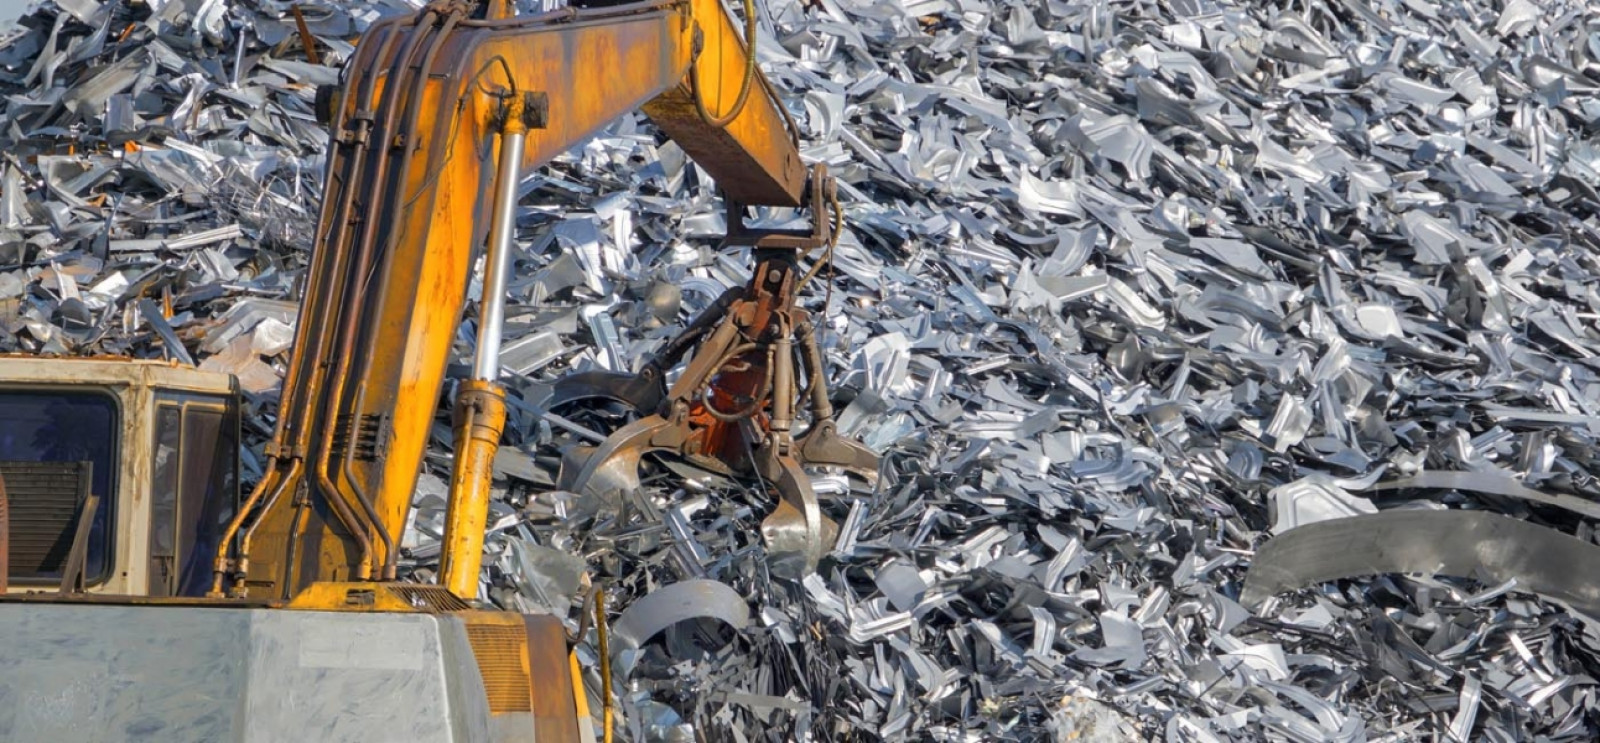 The amazing recyclability of steel